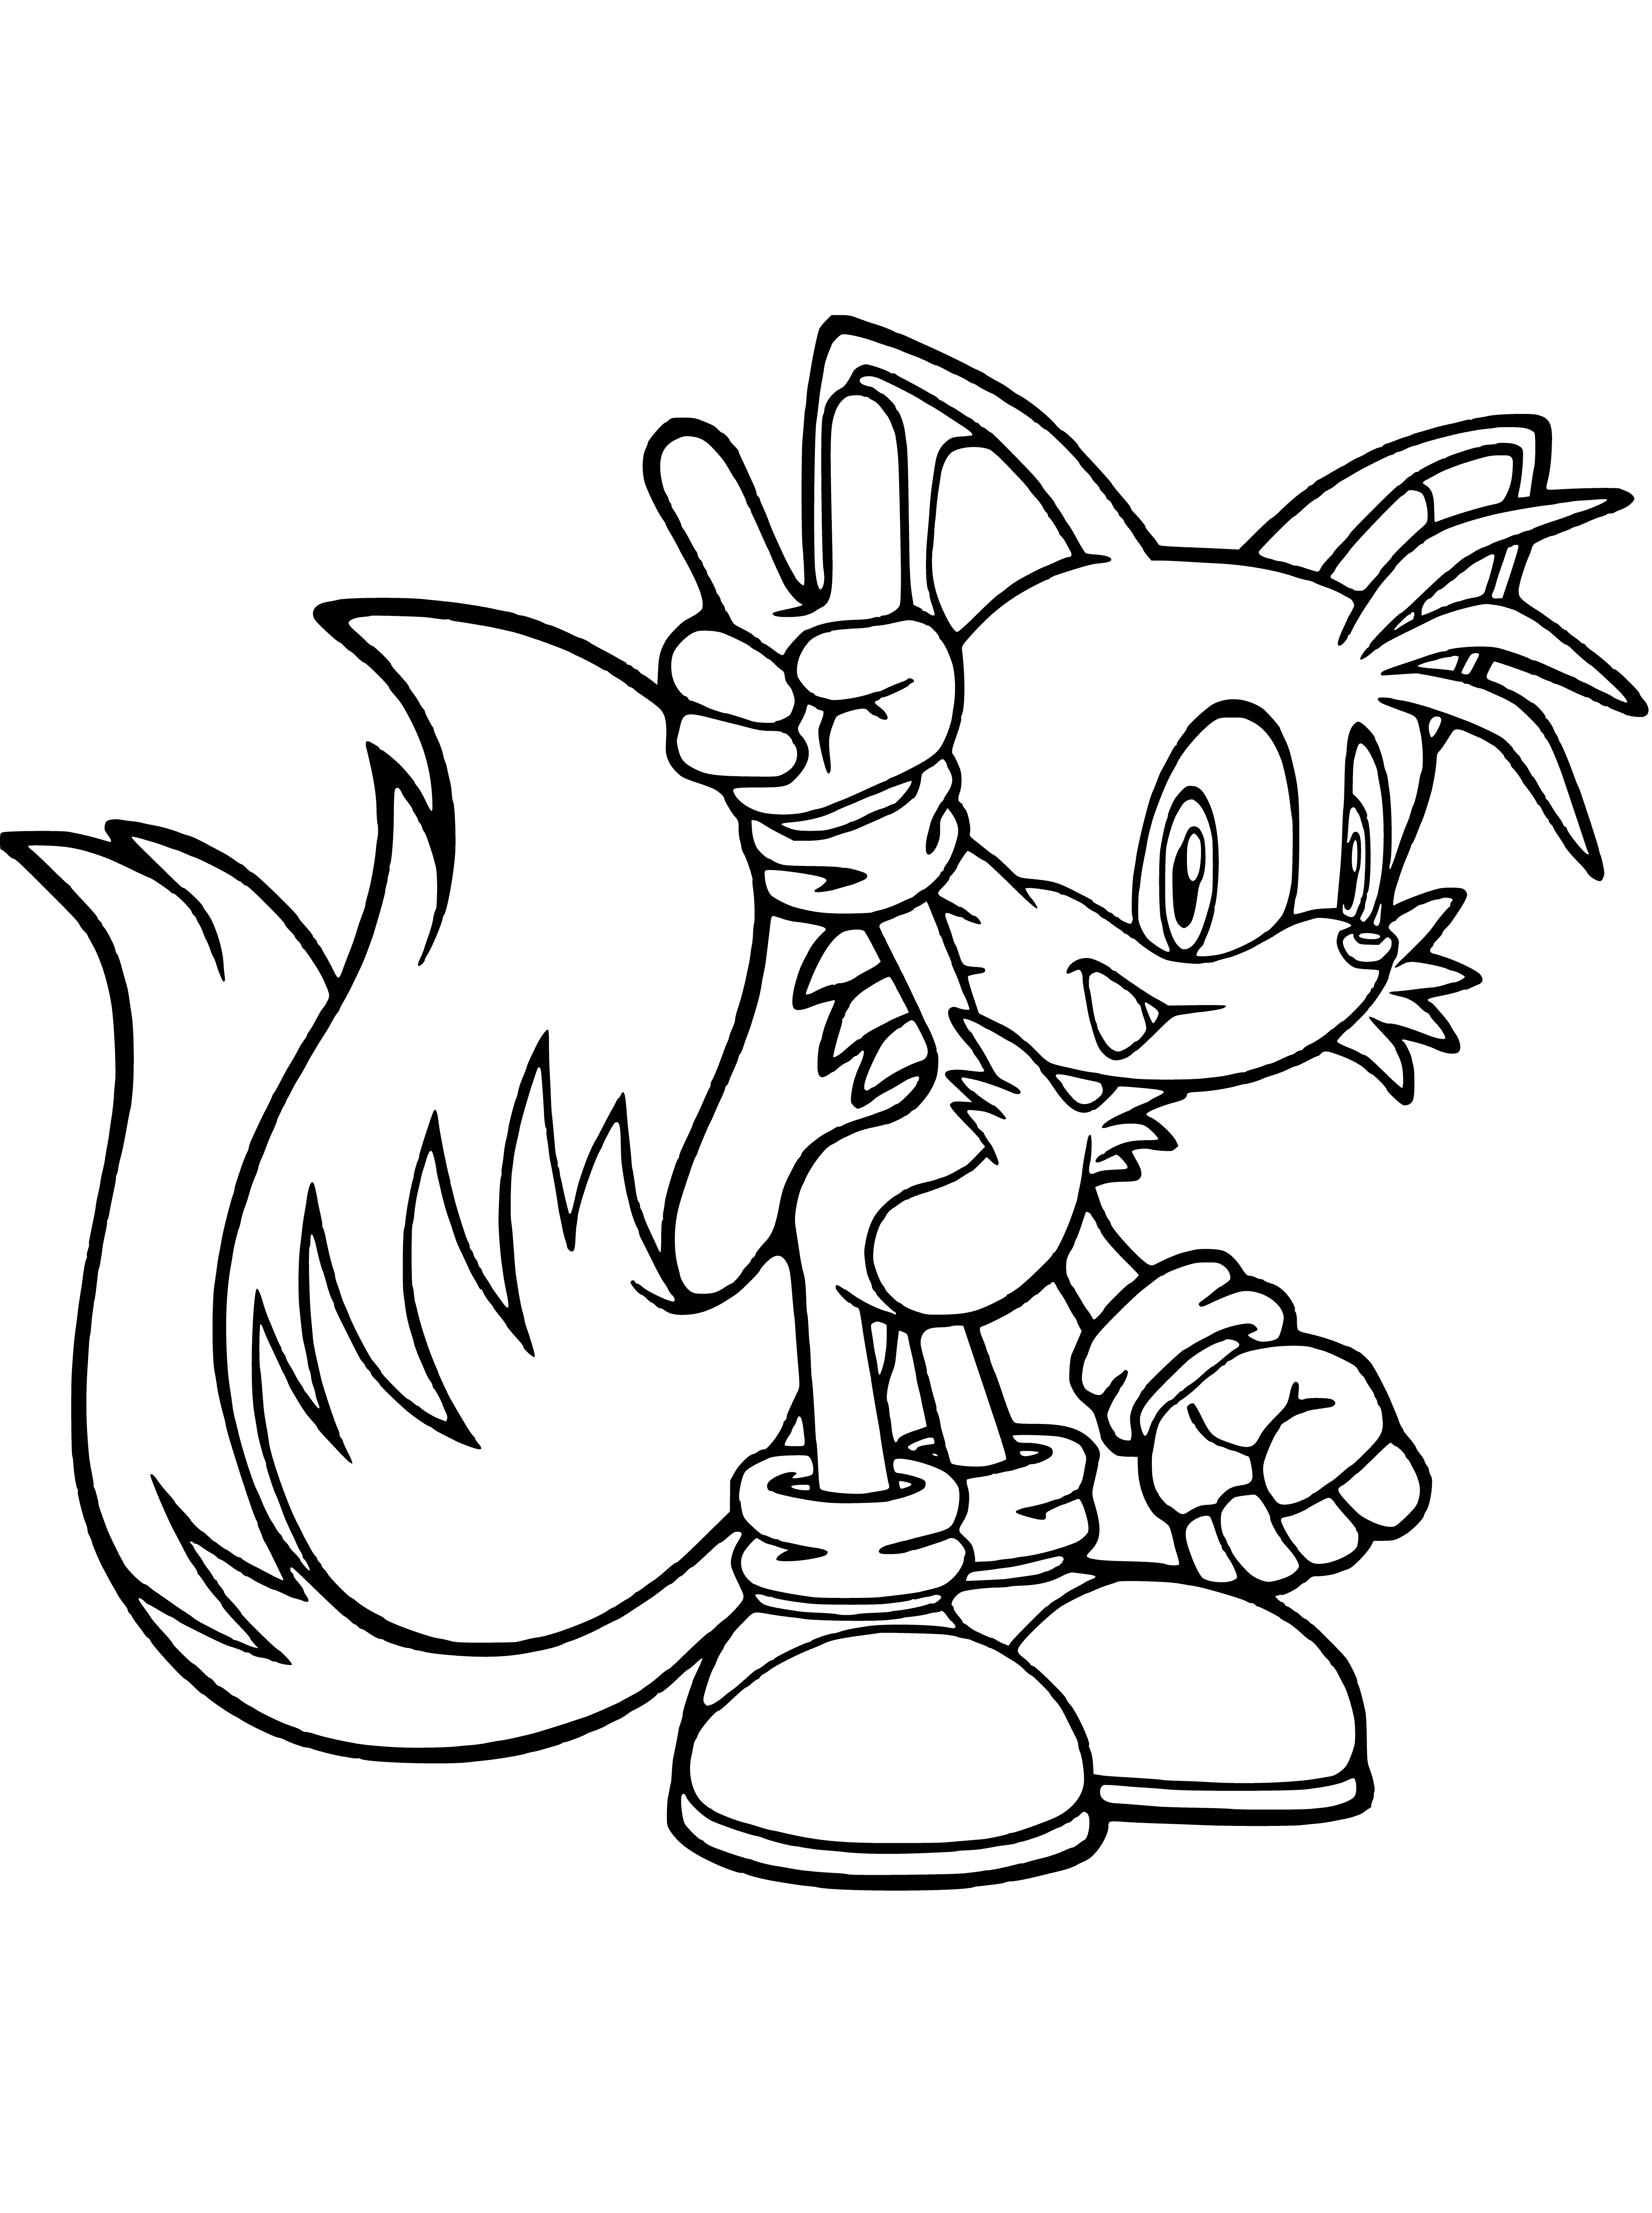 coloring page: Sonic the Hedgehog stands with arms crossed, large green eyes and spiky quills; a vibrant cityscape with tall buildings is behind him. #Sega